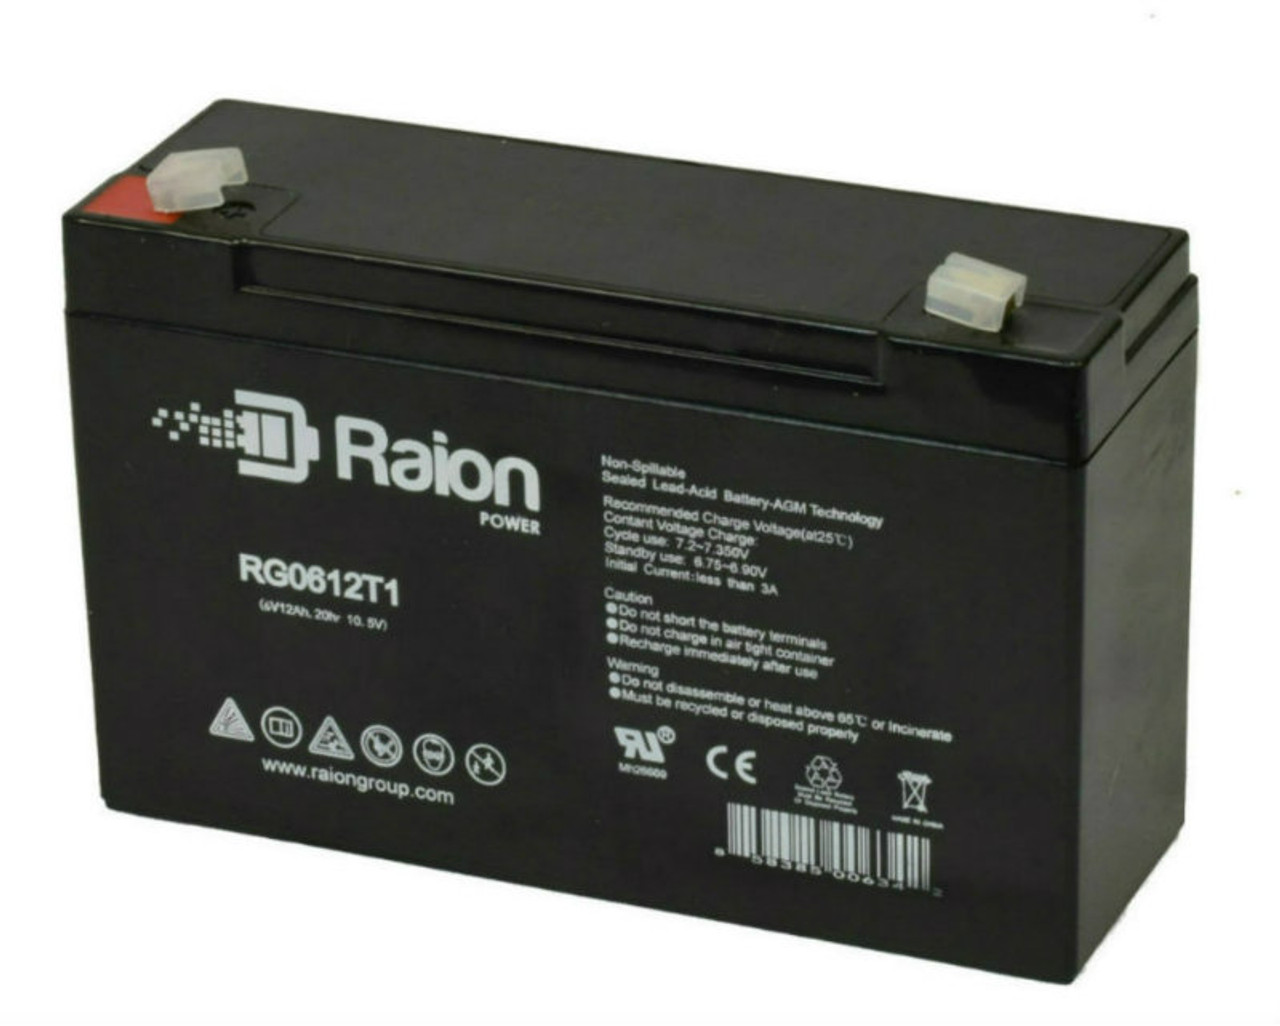 Raion Power RG06120T1 Replacement Battery for Power-Sonic PS-6100